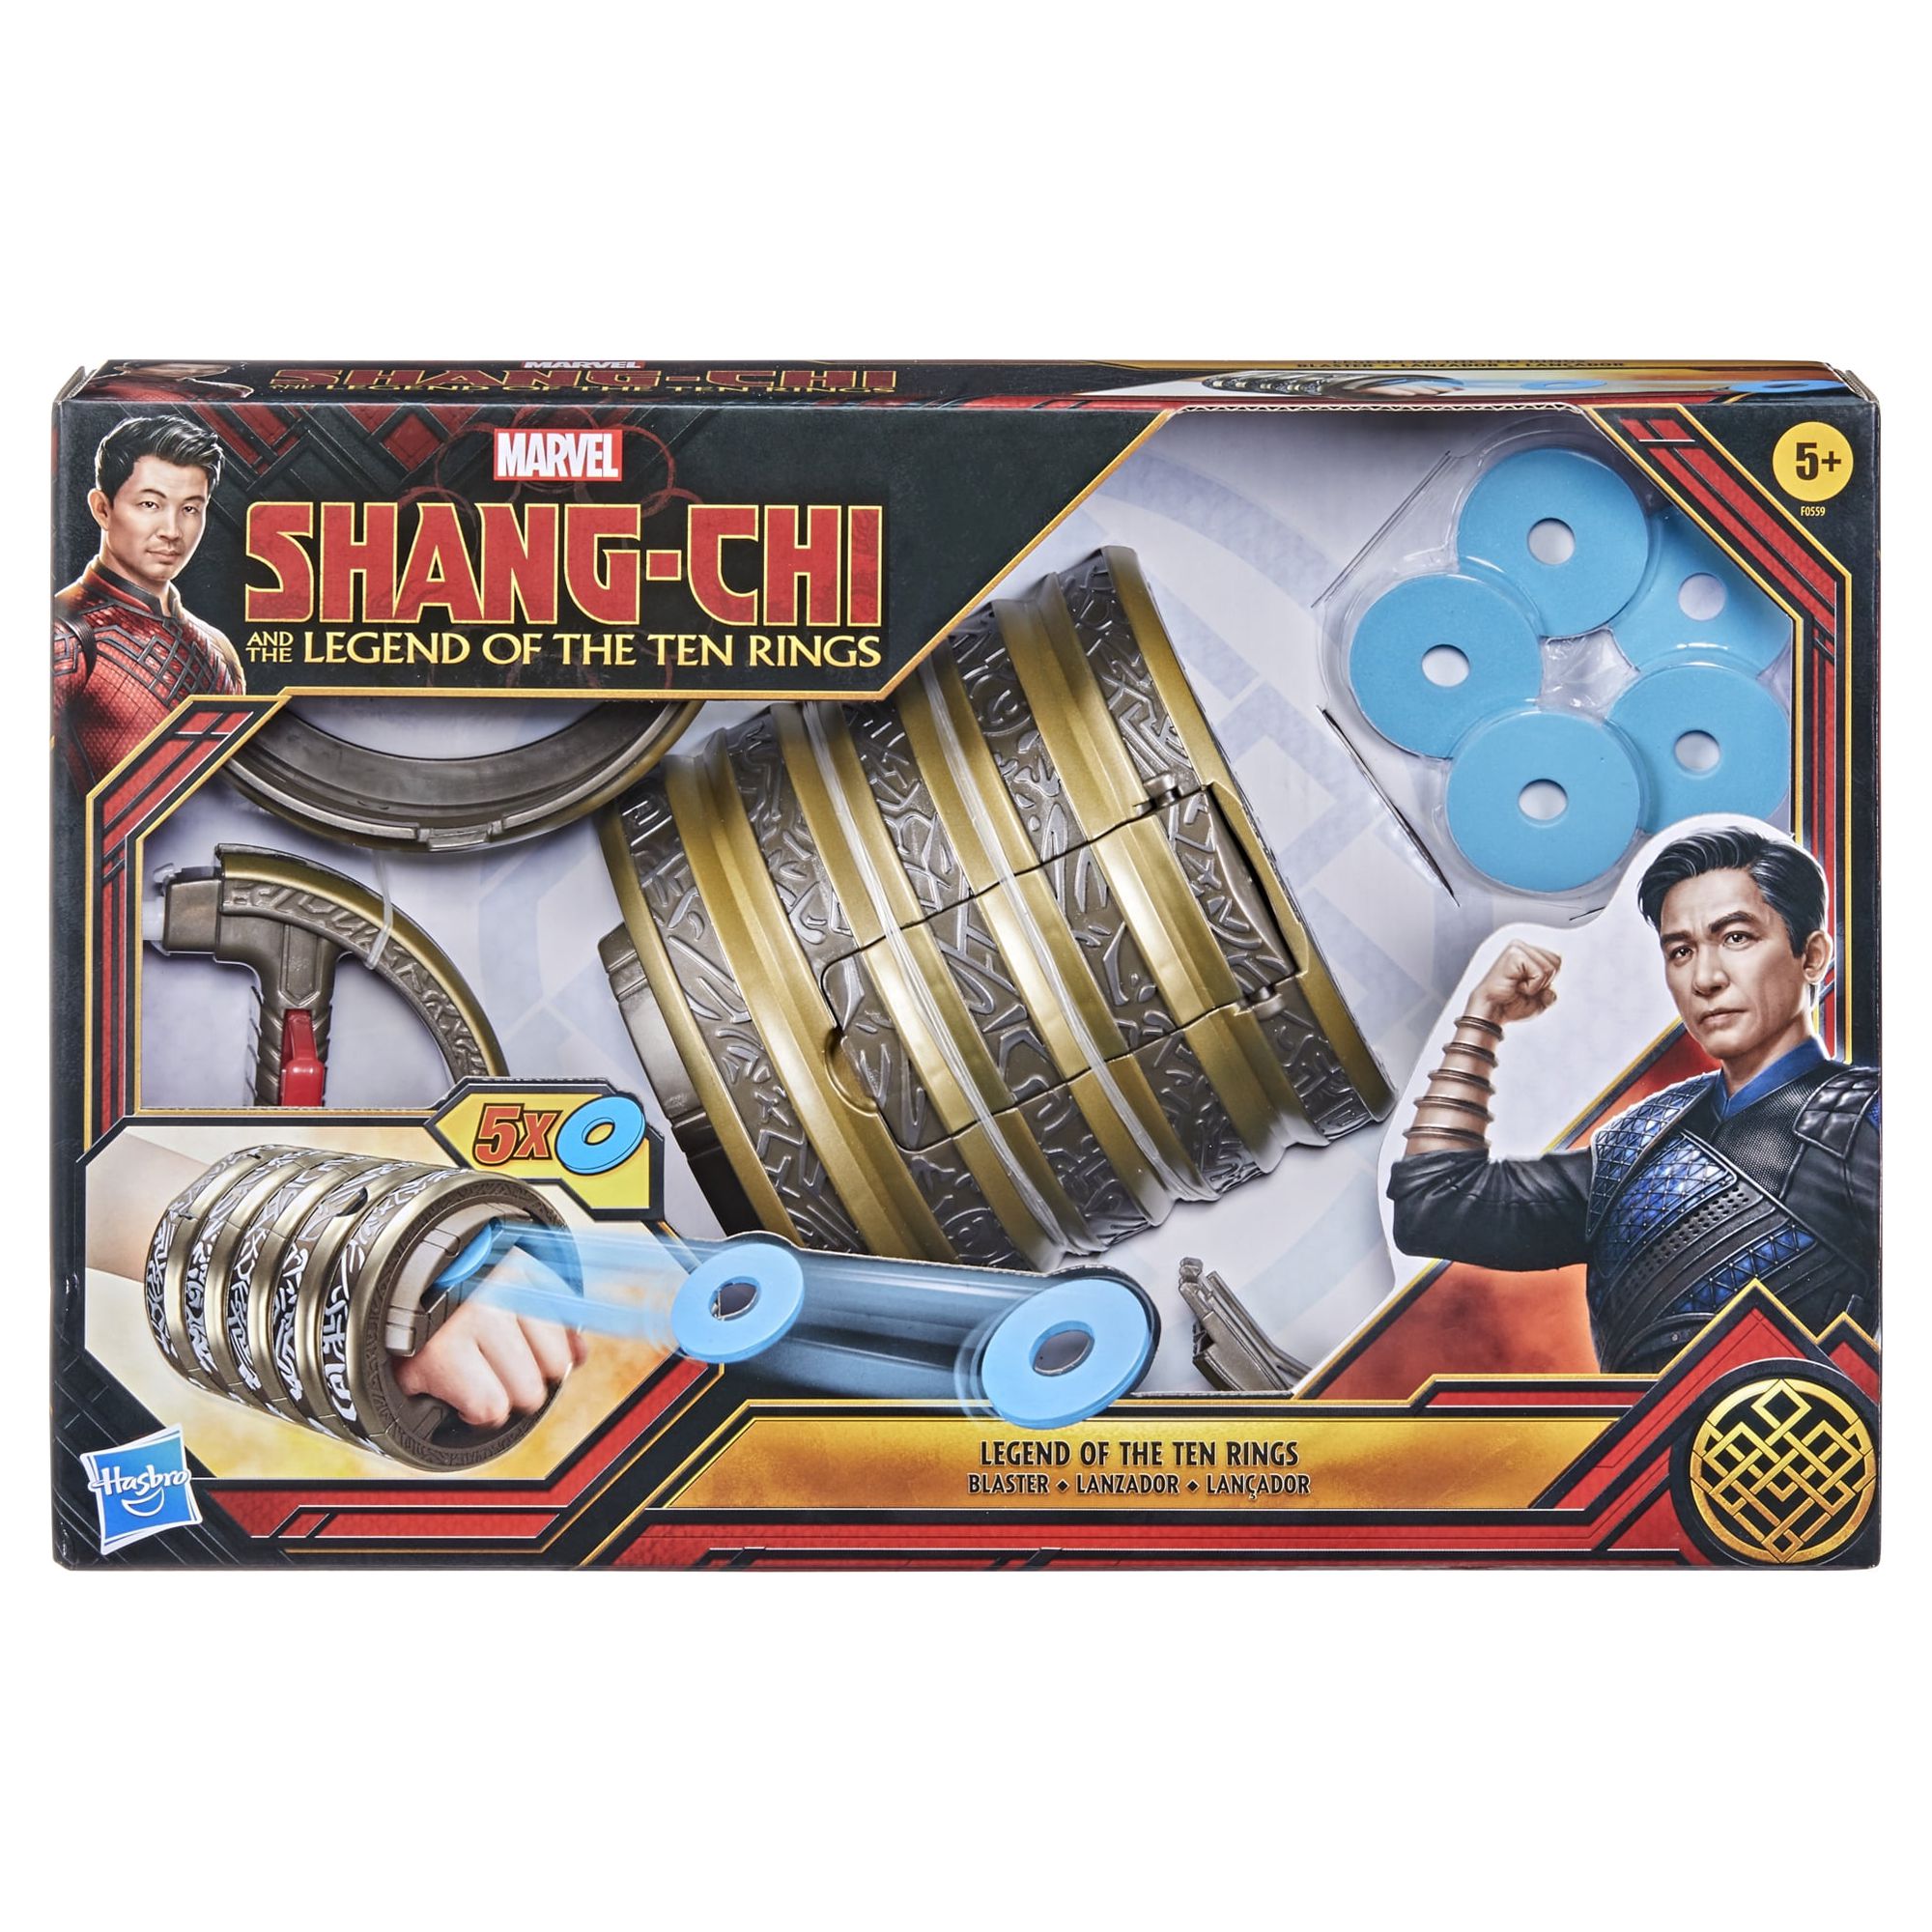 Marvel: Shang Chi And The Legend Of The Ten Rings Kids Toy Action Figure Blaster with 5 Rings for Boys and Girls Ages 5 6 7 8 9 10 and Up - image 1 of 11